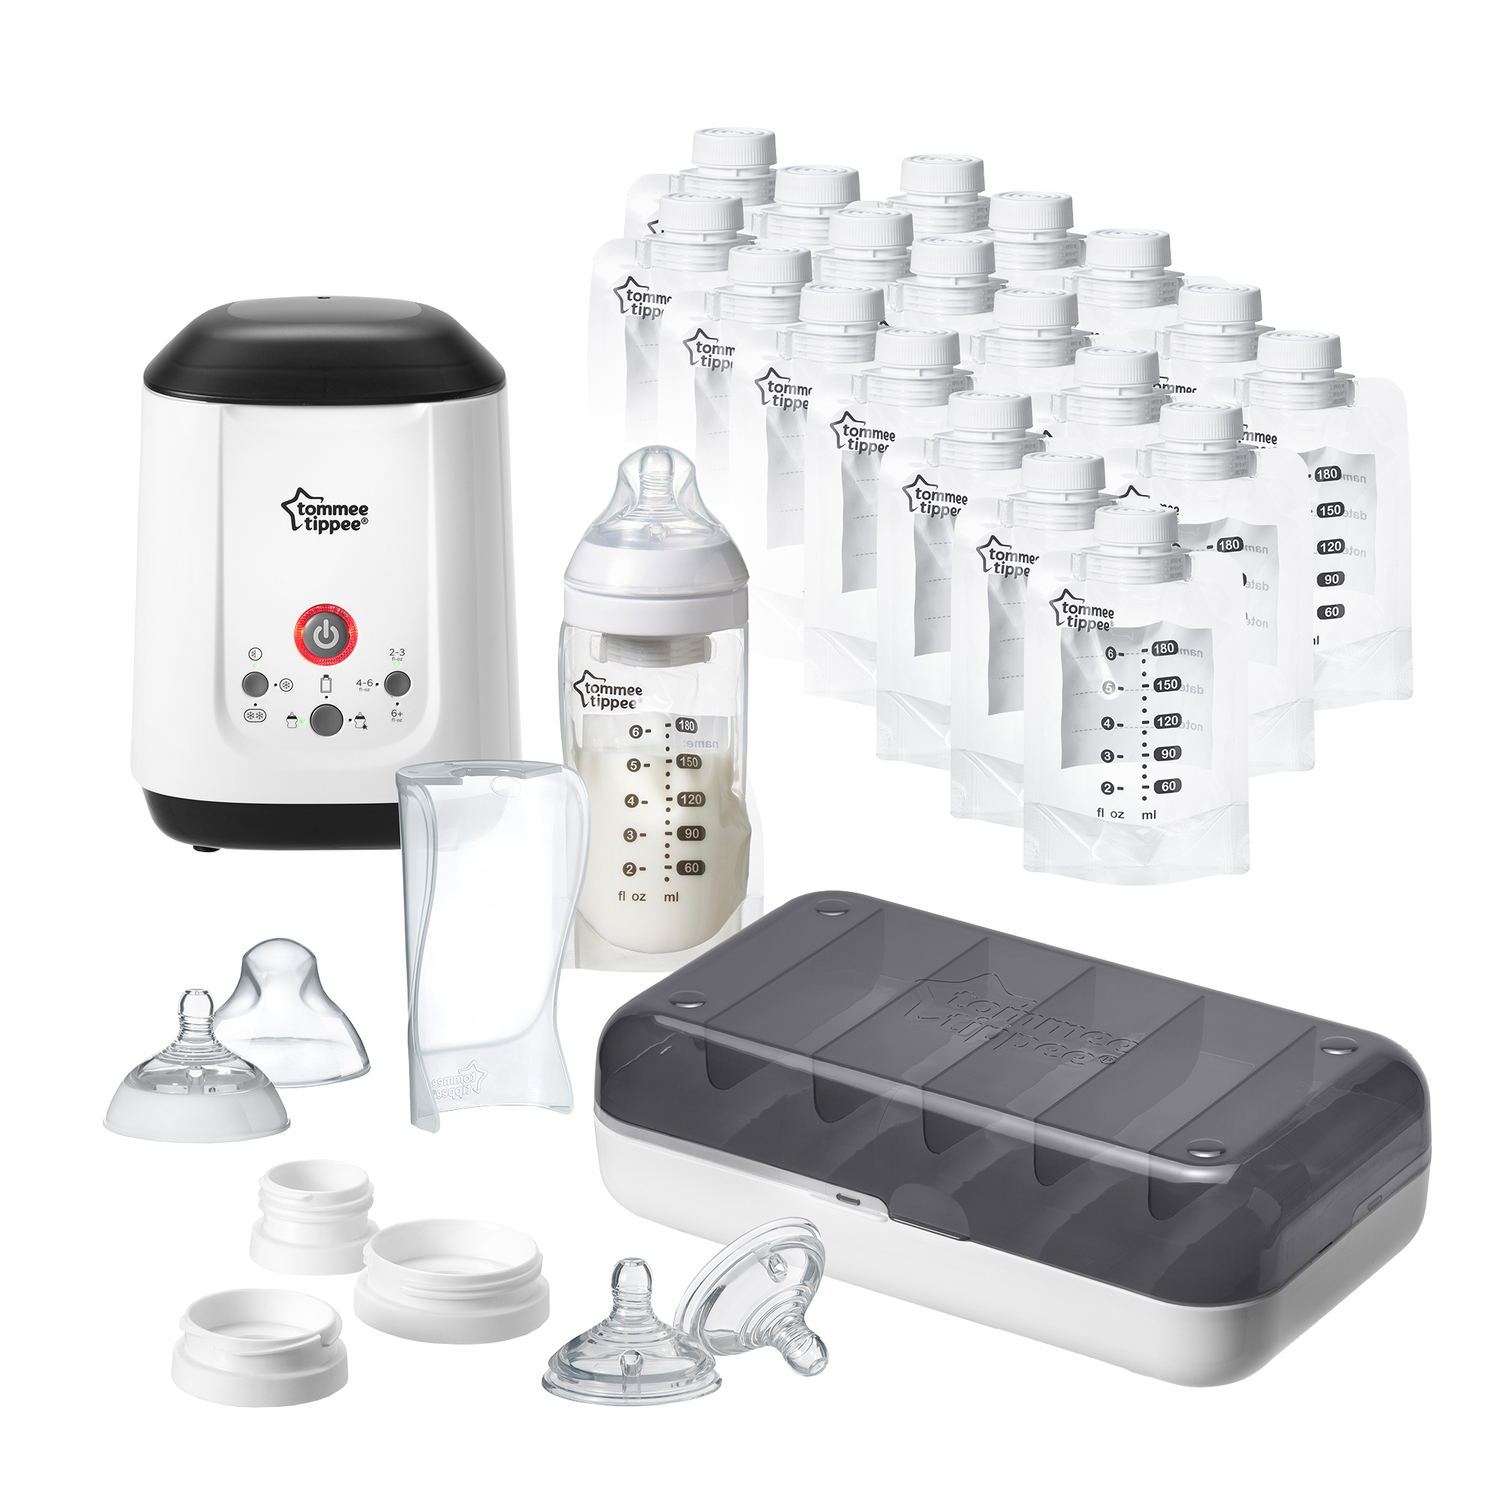 Tommee Tippee Pump and Go Complete Breast Milk Feeding Starter Set